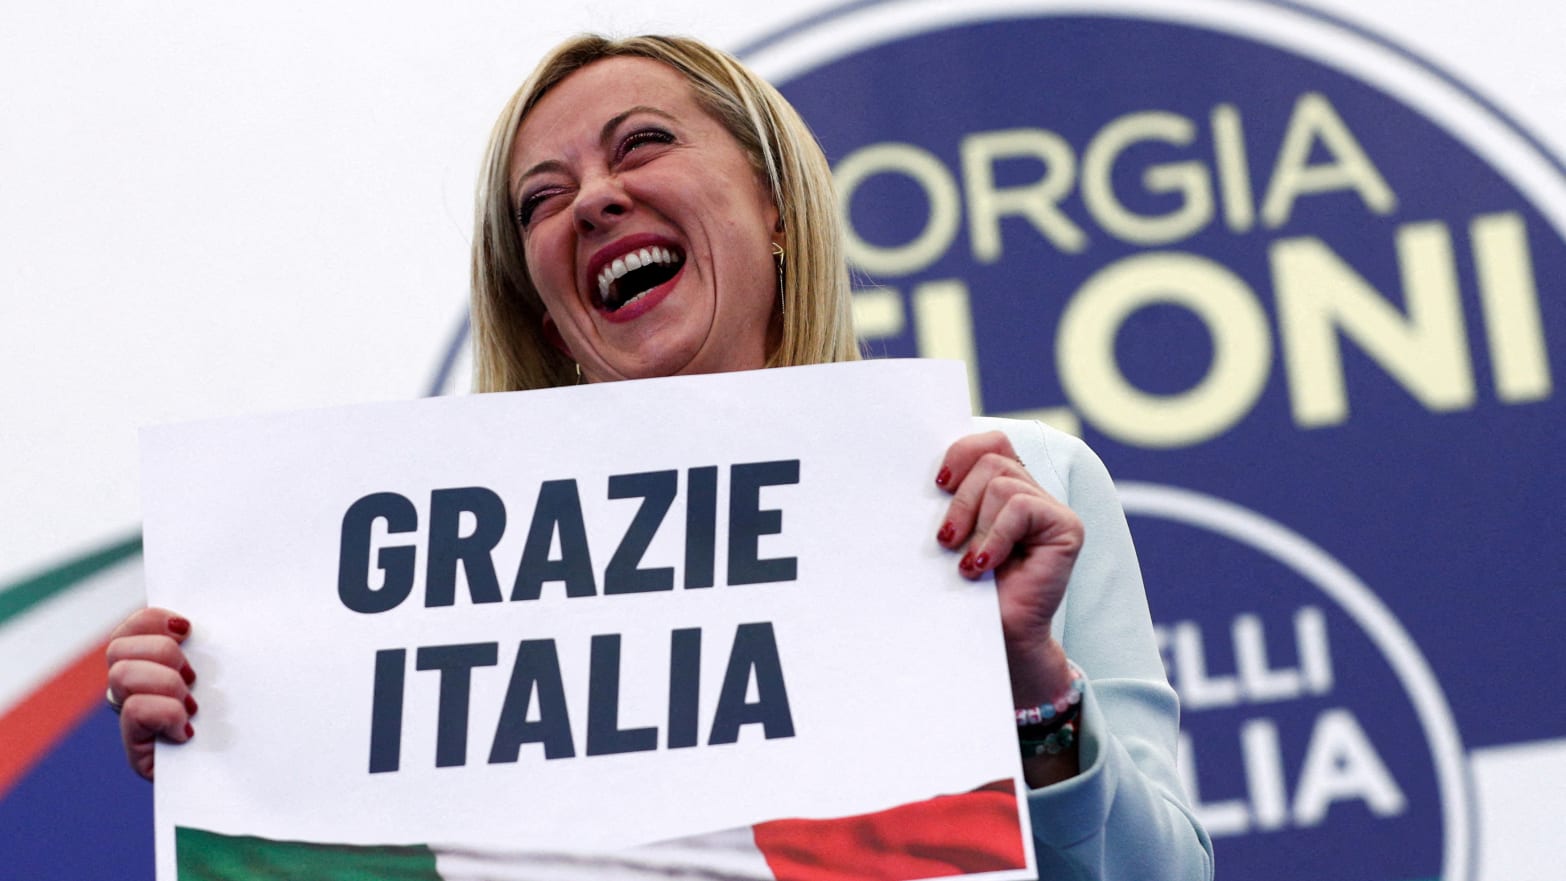 Giorgia Meloni, the Most Powerful Woman in the European Union, Is Anti-Woman pic